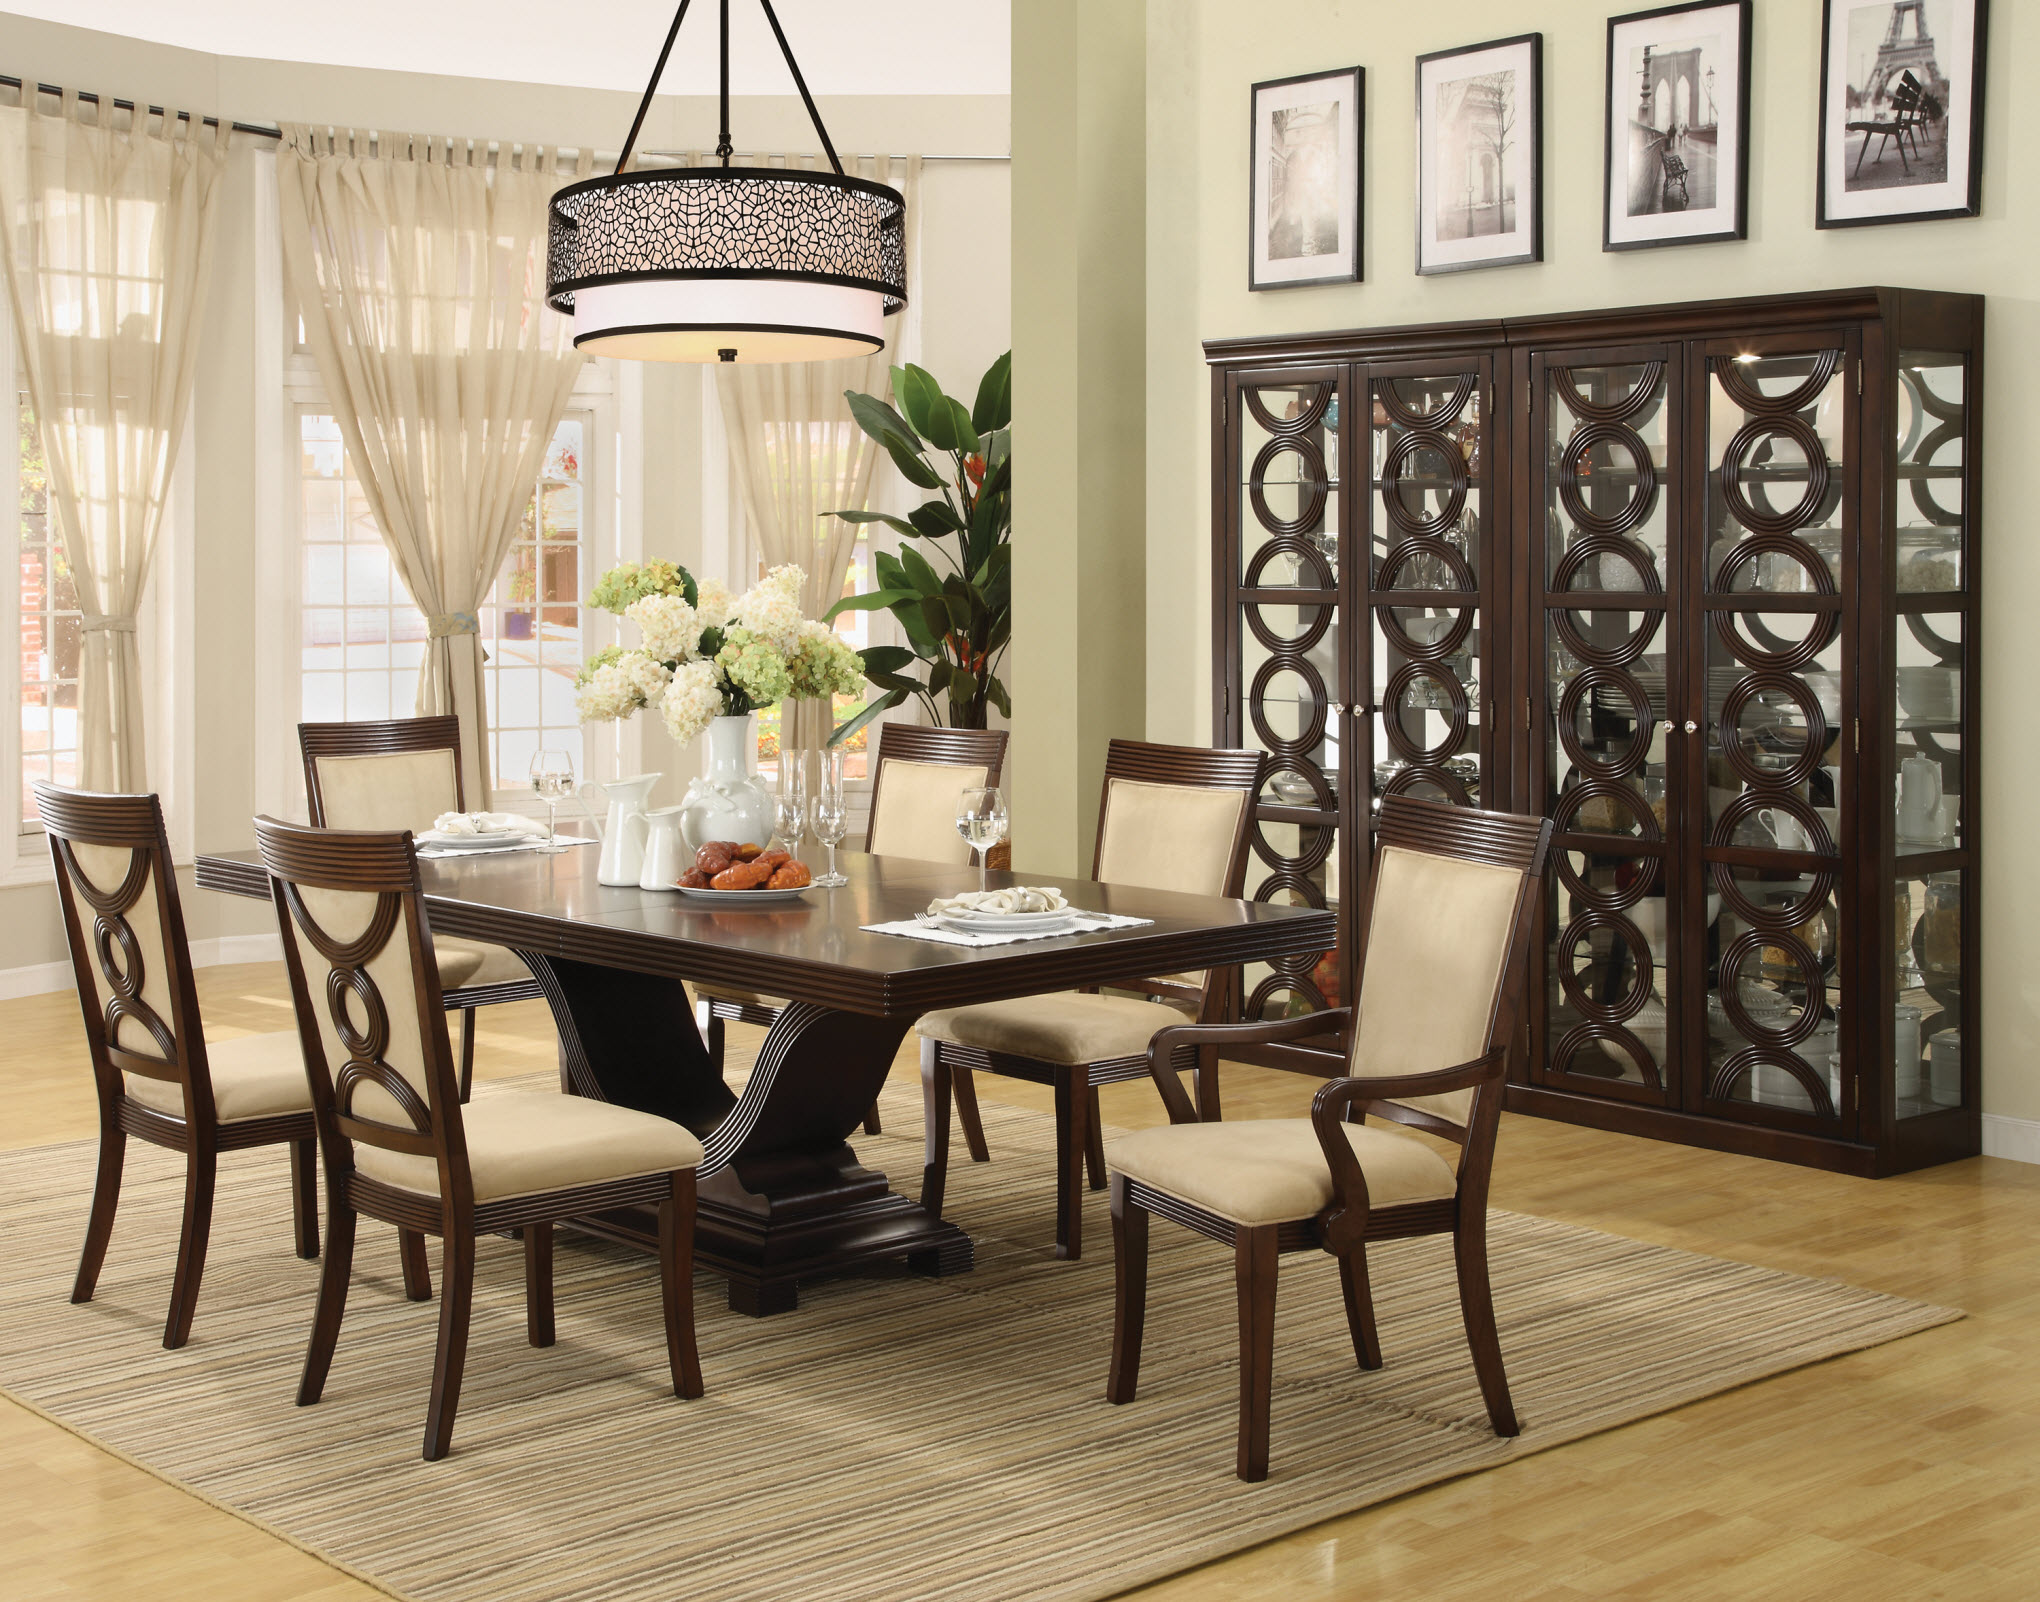 Dining Room Table And Chairs Ideas With Images